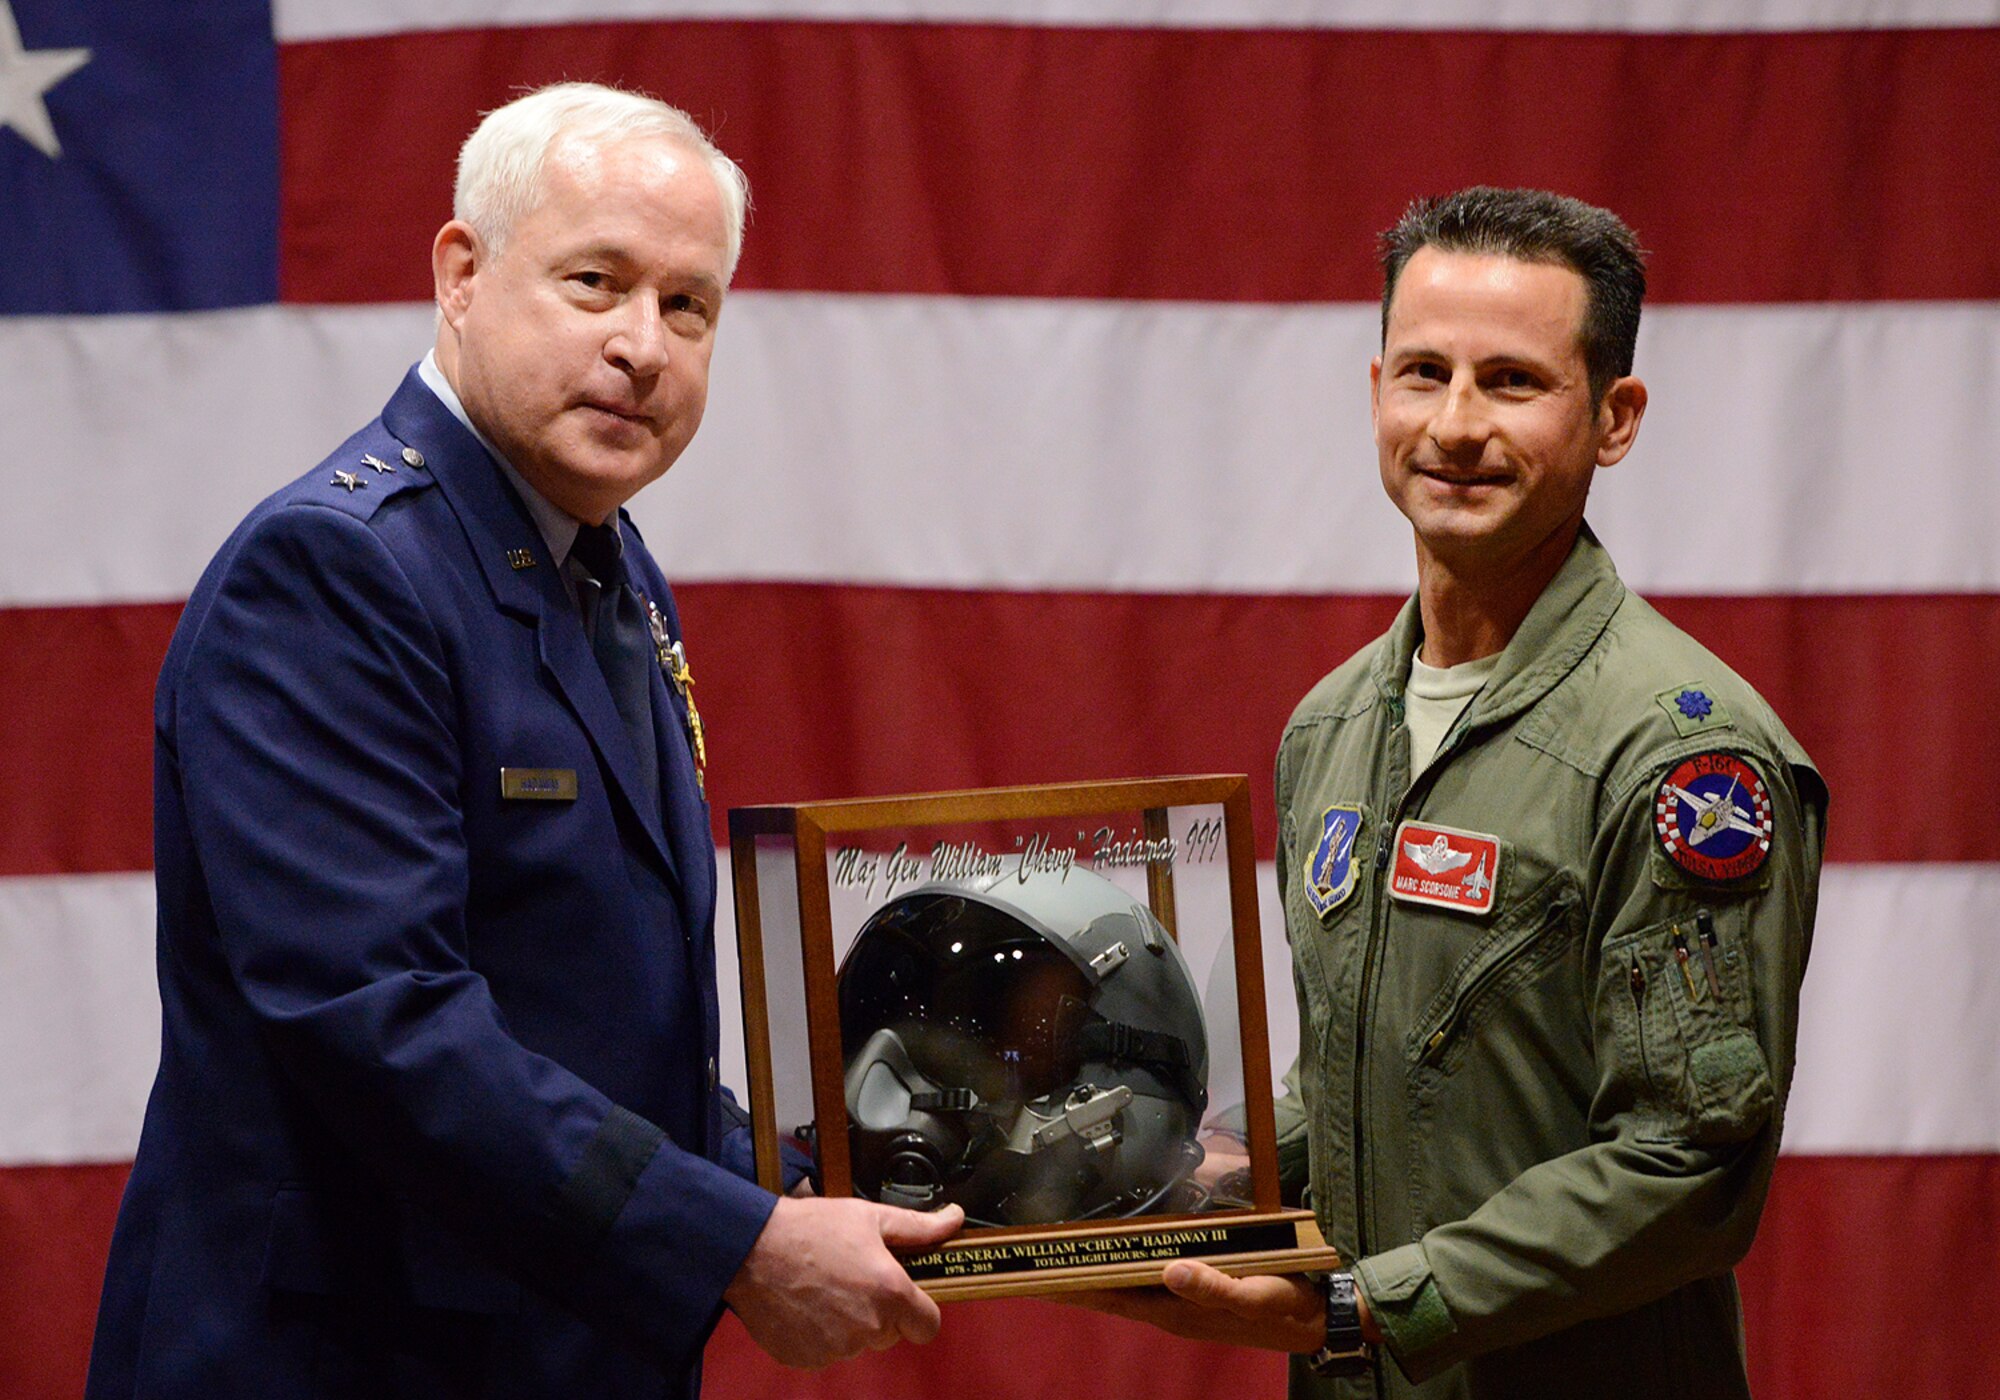 In appreciation for his contributions to the wing and more than 4000 flying hours, Maj. Gen William S. Hadaway III, former Director of Logistics, National Guard Bureau, receives an encased helmet from 125th Fighter Squadron Commander, Lt. Col. Marc Scorsone, April 11, at the Brig. Gen. Joseph W. Turner complex, Tulsa Air National Guard Base, Okla.   Hadaway was a former wing commander at the 138th Fighter Wing in Tulsa from Jan. 2004 to May 2008.  (U.S. National Guard photo by Master Sgt. Mark A. Moore/Released)